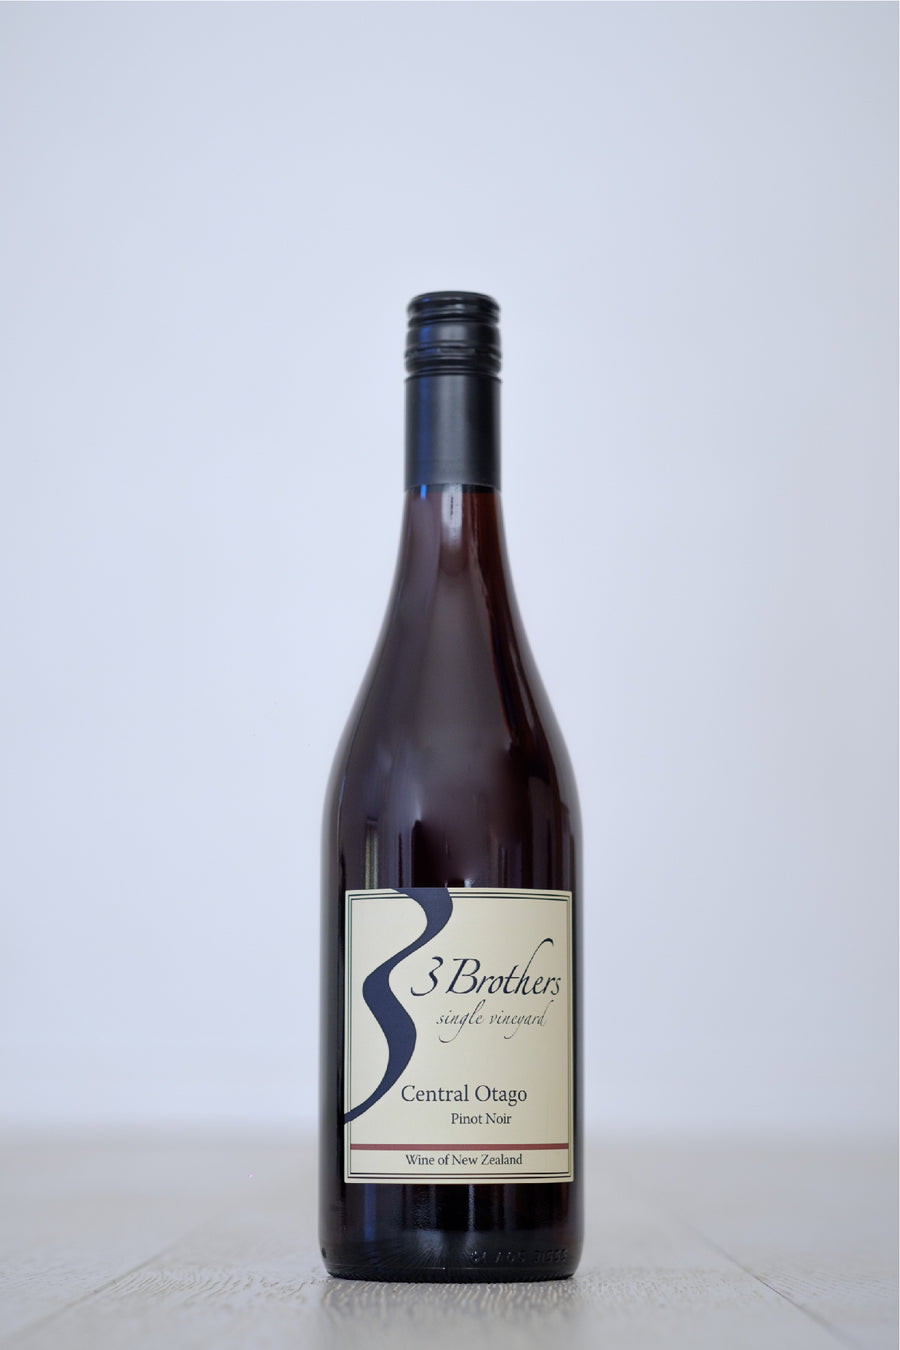 3 Brothers Central Otago Pinot Noir 2021